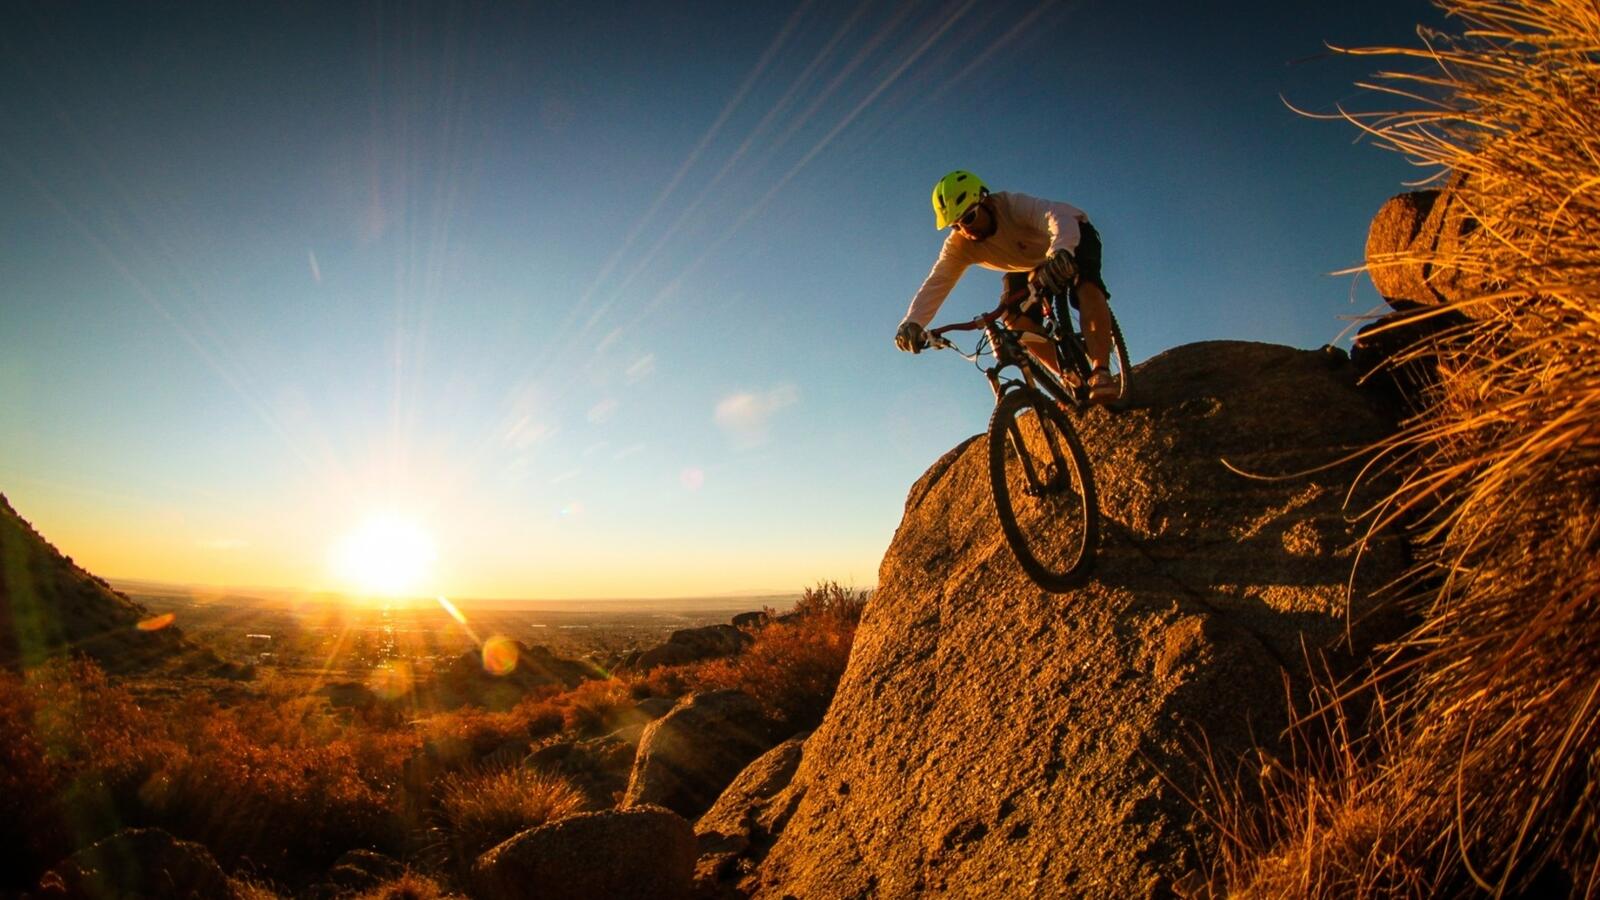 Wallpapers bike cyclist extreme on the desktop